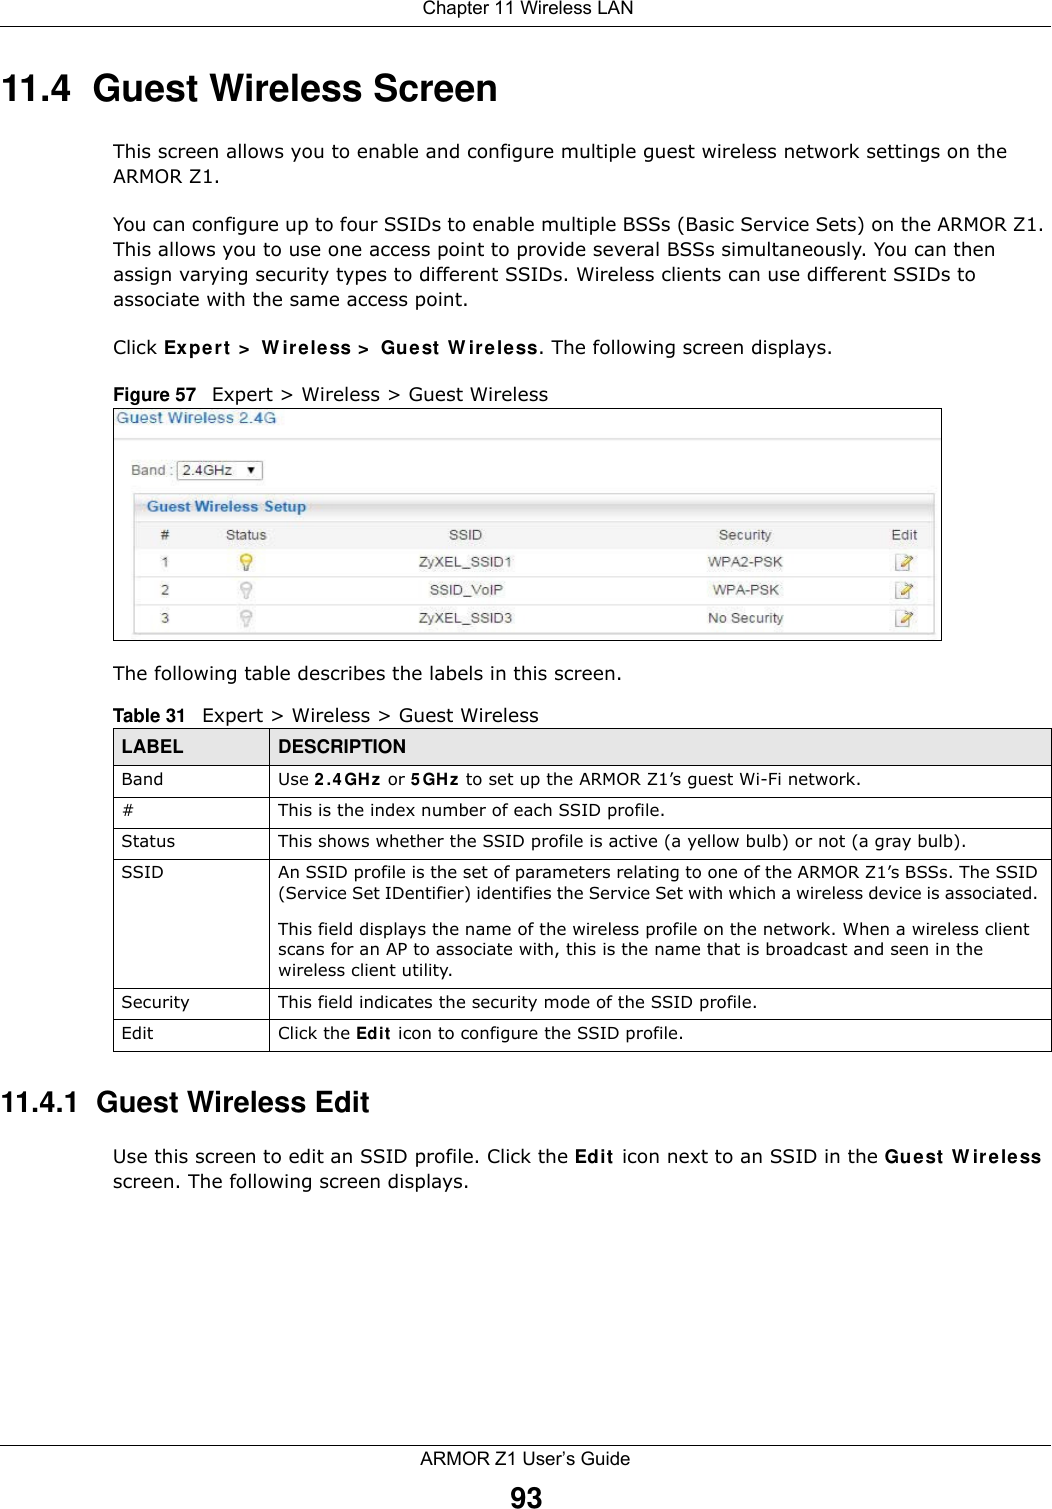  Chapter 11 Wireless LANARMOR Z1 User’s Guide9311.4  Guest Wireless Screen This screen allows you to enable and configure multiple guest wireless network settings on the ARMOR Z1.You can configure up to four SSIDs to enable multiple BSSs (Basic Service Sets) on the ARMOR Z1. This allows you to use one access point to provide several BSSs simultaneously. You can then assign varying security types to different SSIDs. Wireless clients can use different SSIDs to associate with the same access point.Click Expert &gt; Wireless &gt; Guest Wireless. The following screen displays.Figure 57   Expert &gt; Wireless &gt; Guest WirelessThe following table describes the labels in this screen.11.4.1  Guest Wireless EditUse this screen to edit an SSID profile. Click the Edit icon next to an SSID in the Guest Wireless screen. The following screen displays.Table 31   Expert &gt; Wireless &gt; Guest WirelessLABEL DESCRIPTIONBand Use 2.4GHz or 5GHz to set up the ARMOR Z1’s guest Wi-Fi network.#This is the index number of each SSID profile. Status This shows whether the SSID profile is active (a yellow bulb) or not (a gray bulb).SSID An SSID profile is the set of parameters relating to one of the ARMOR Z1’s BSSs. The SSID (Service Set IDentifier) identifies the Service Set with which a wireless device is associated. This field displays the name of the wireless profile on the network. When a wireless client scans for an AP to associate with, this is the name that is broadcast and seen in the wireless client utility.Security This field indicates the security mode of the SSID profile.Edit Click the Edit icon to configure the SSID profile.